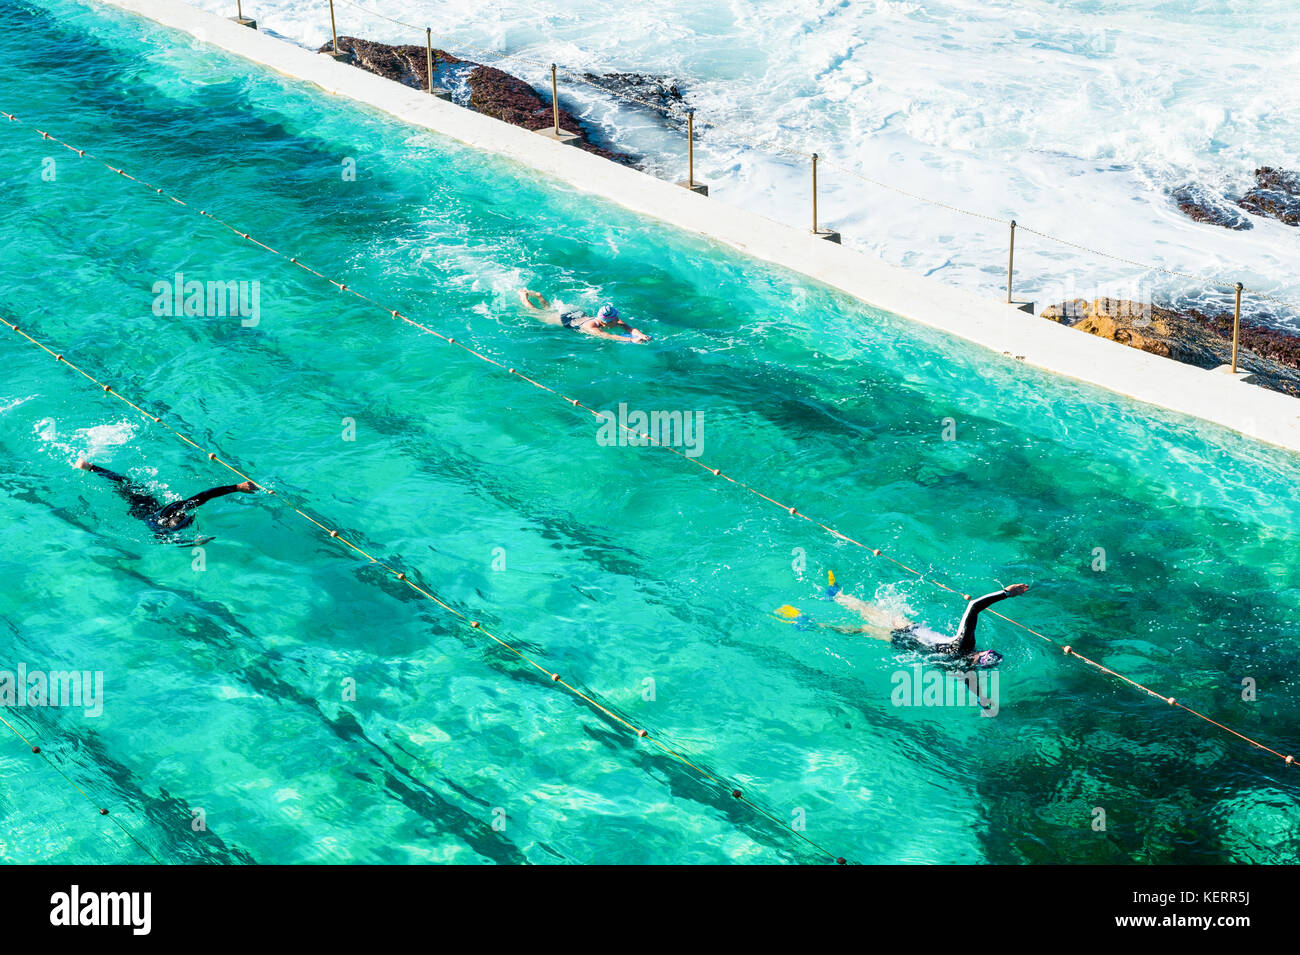 Swimmers enjoy the crystal clear waters of the outdoor pool and sea water around Bondi beach and the coastal walk from Coogee to Bondi in Sydney Austr Stock Photo